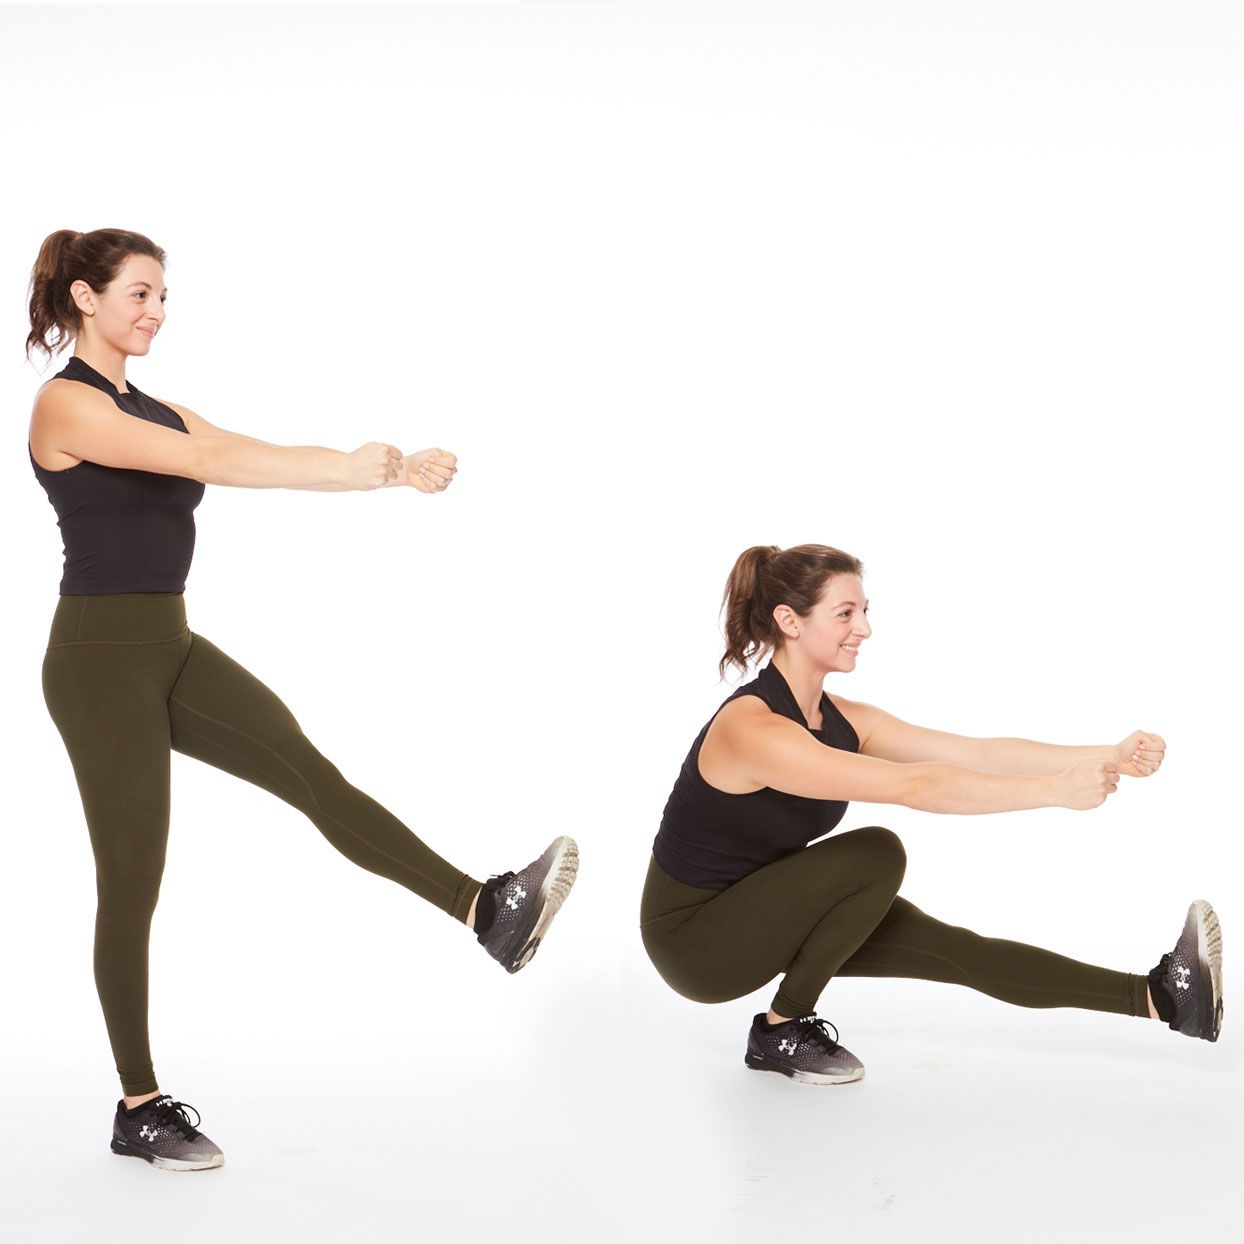 woman in workout clothes demonstrating how to do a pistol squat glute exercise